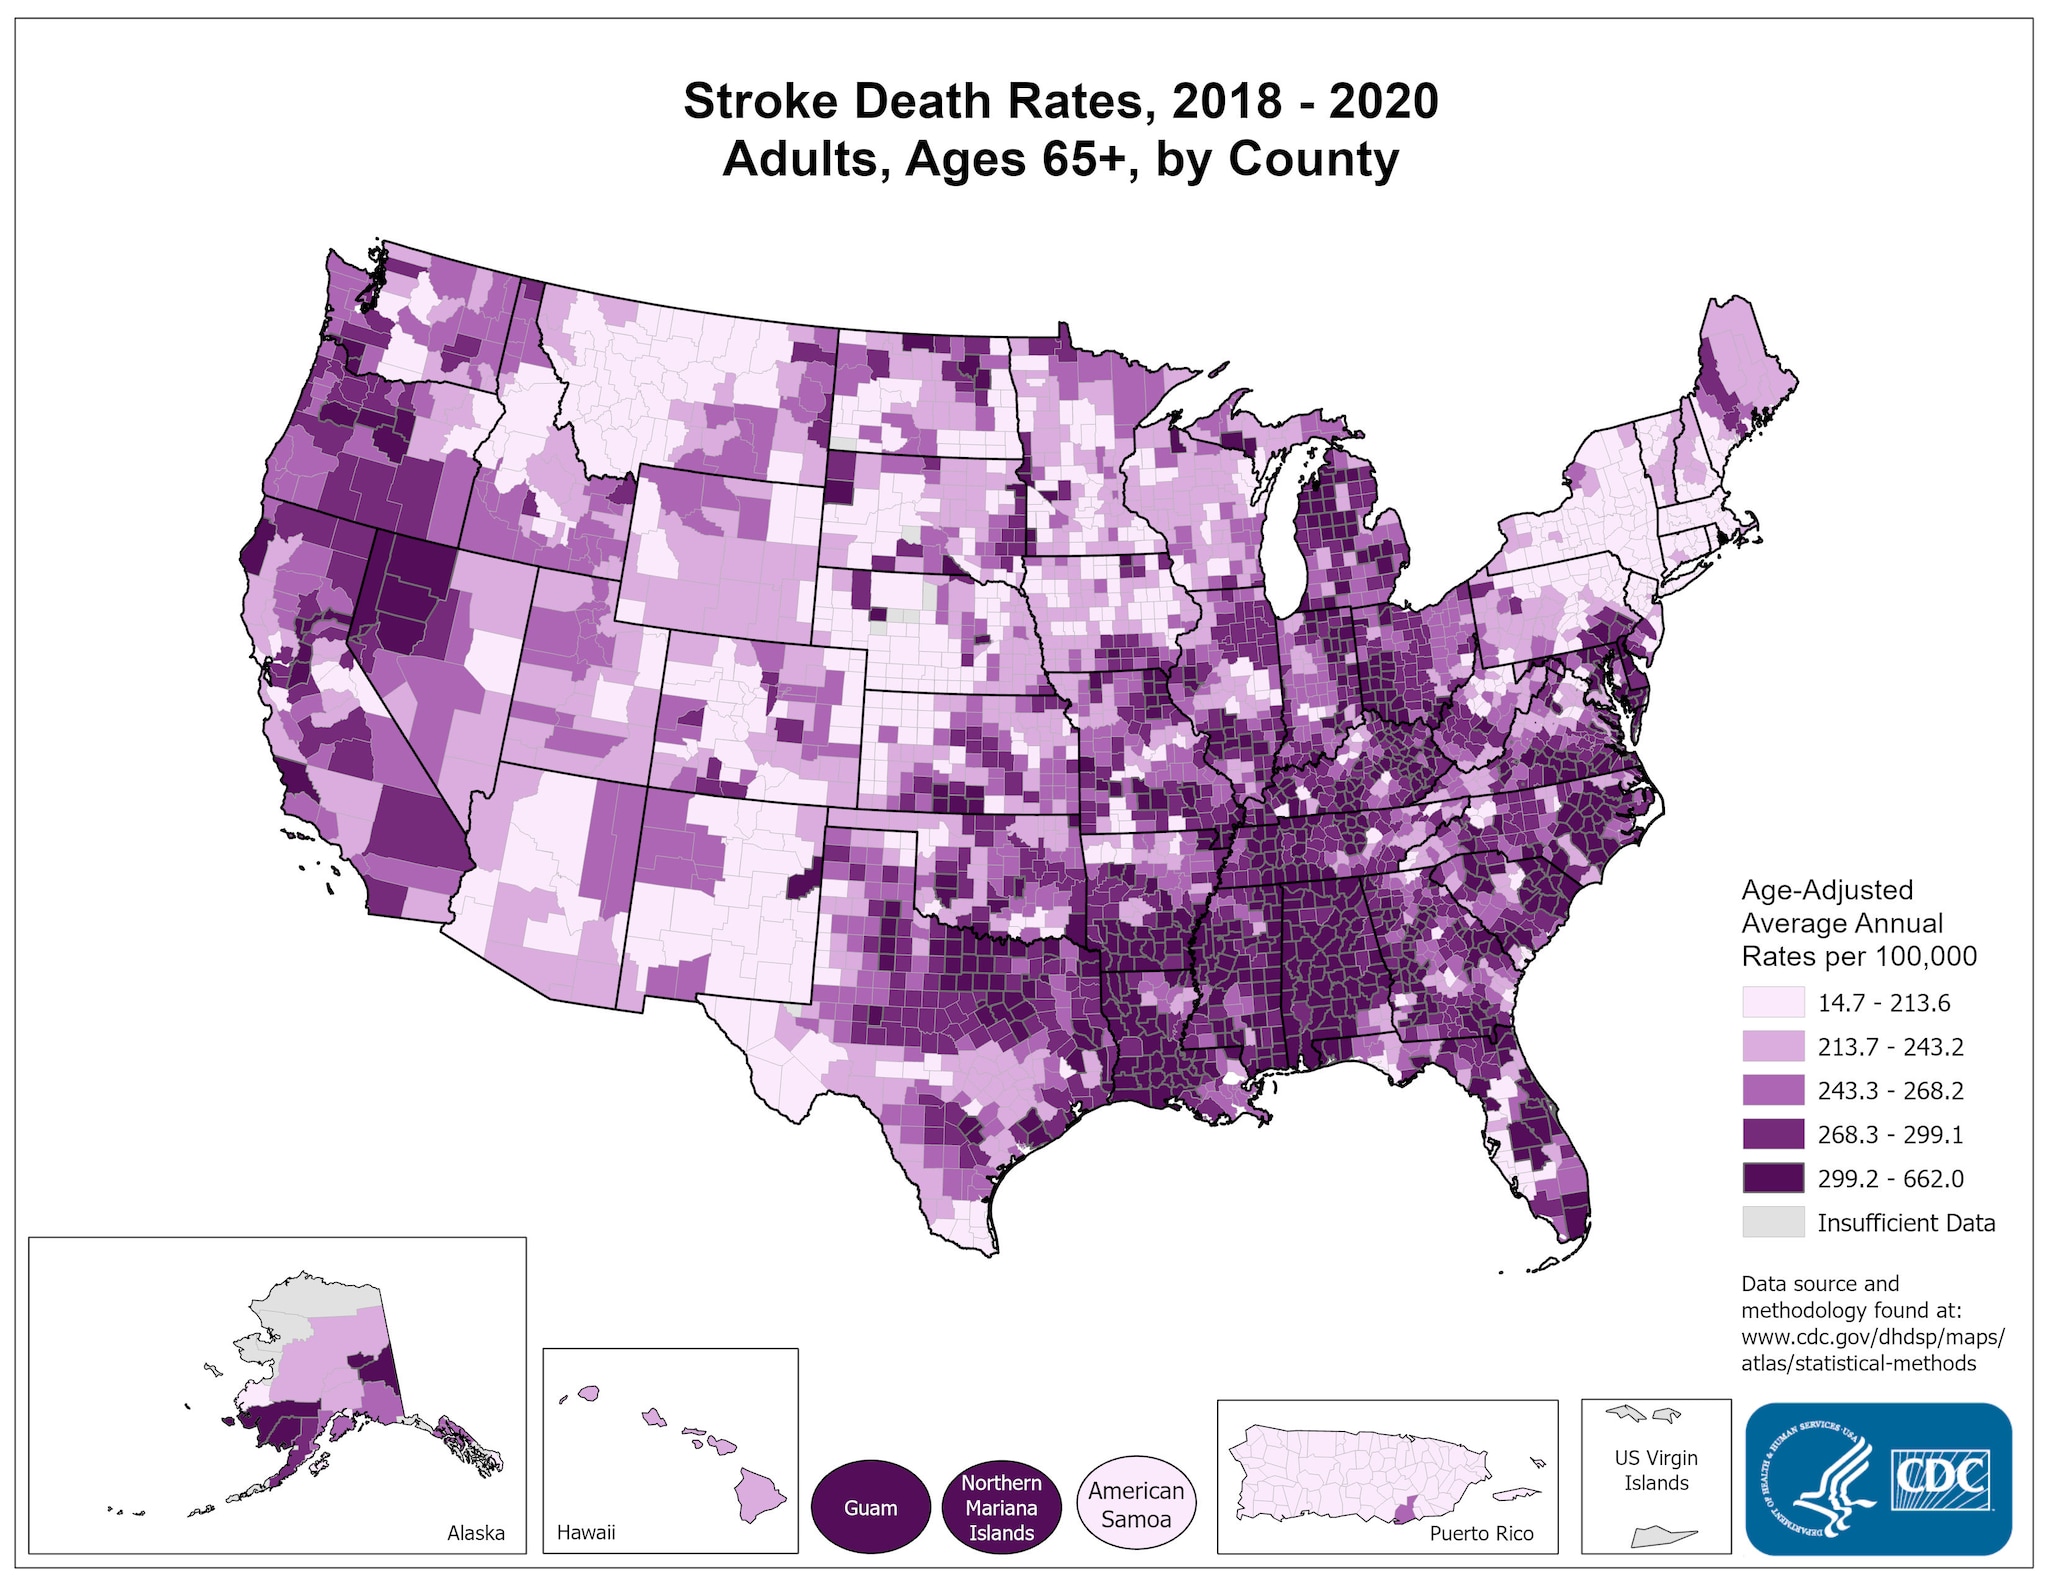 Stroke Death Rates for 2014 through 2016 for Adults Aged 65 Years and Older by County. The map shows that concentrations of counties with the highest stroke death rates - meaning the top quintile - are located primarily in the Southeast, with heavy concentrations of high-rate counties in Arkansas, Kentucky, West Virginia, Alabama, and South Carolina. Pockets of high-rate counties also are found in Oklahoma, parts of Texas, North Carolina, Tennessee, Utah, North Dakota, South Dakota, Kansas, Montana, California, and Alaska.